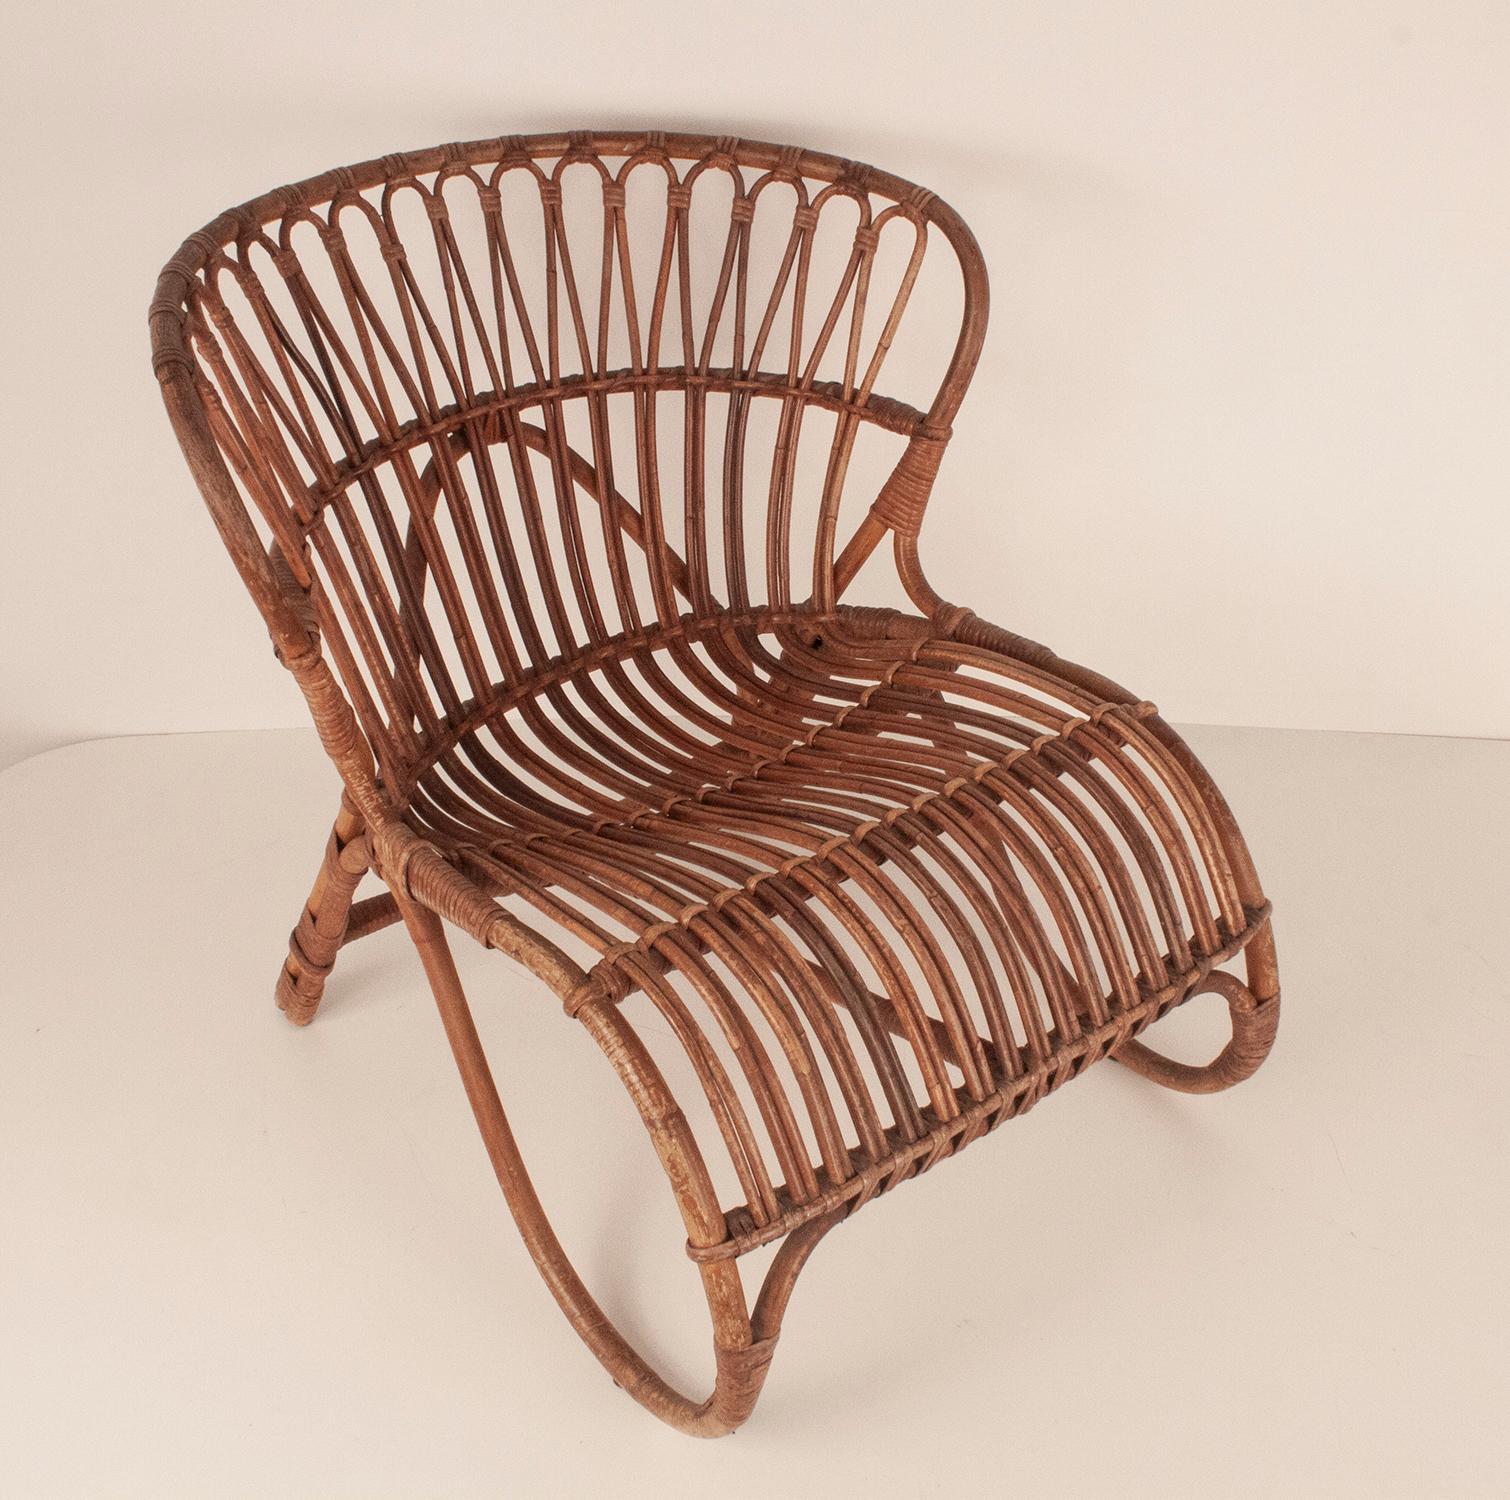 Bamboo and Rattan Armchair in the Style of Viggo Boesen, Netherlands 50's For Sale 1